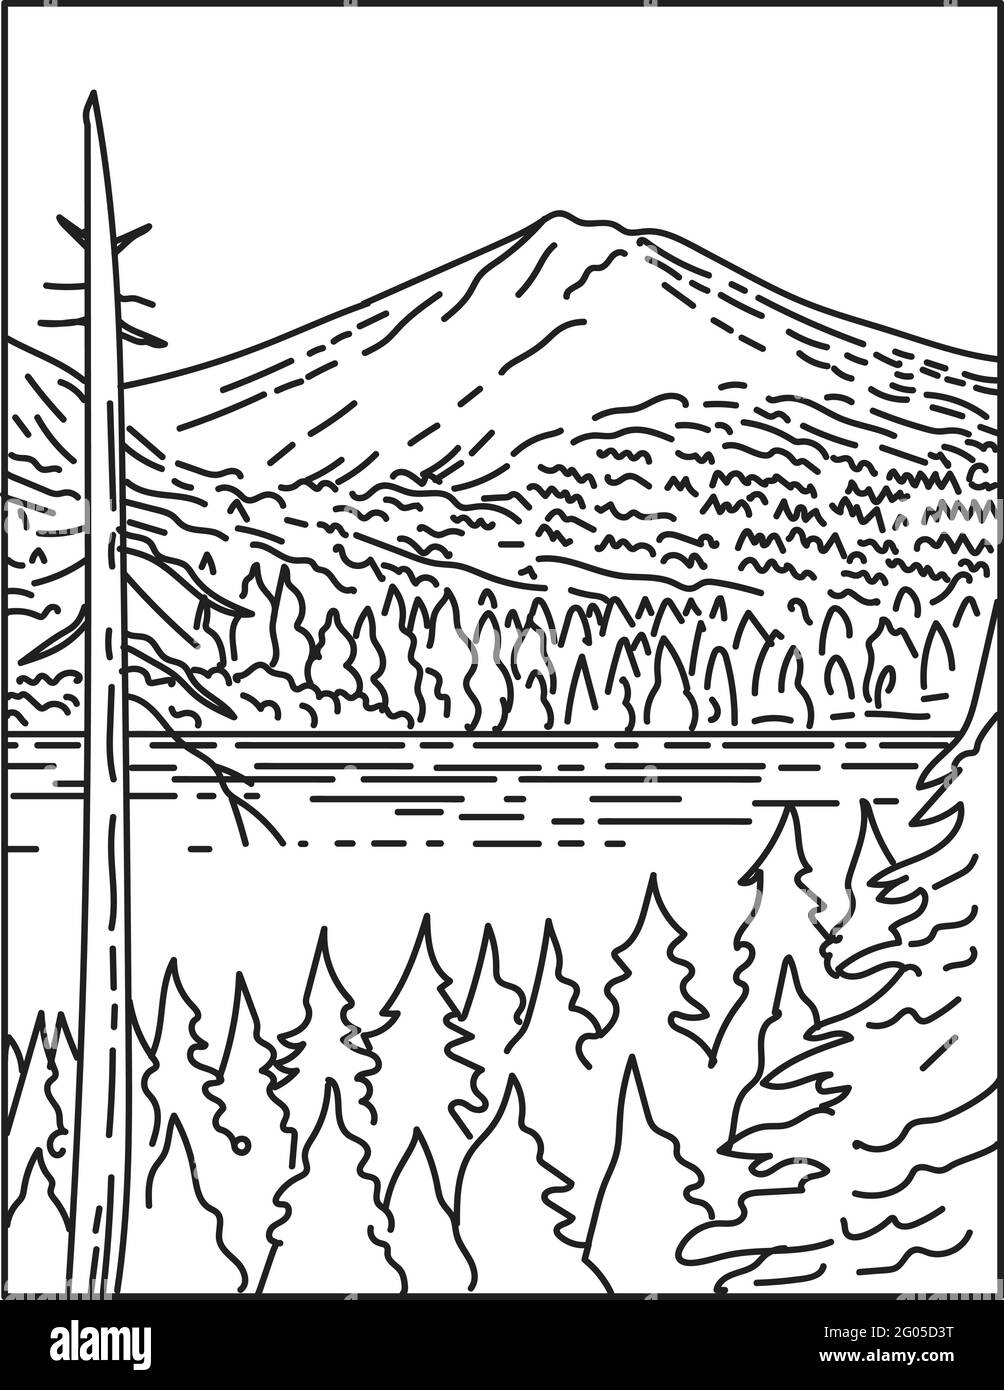 Mono line illustration of summit of Lassen Peak Volcano within Lassen Volcanic National Park in northern California, United States of America done in Stock Vector